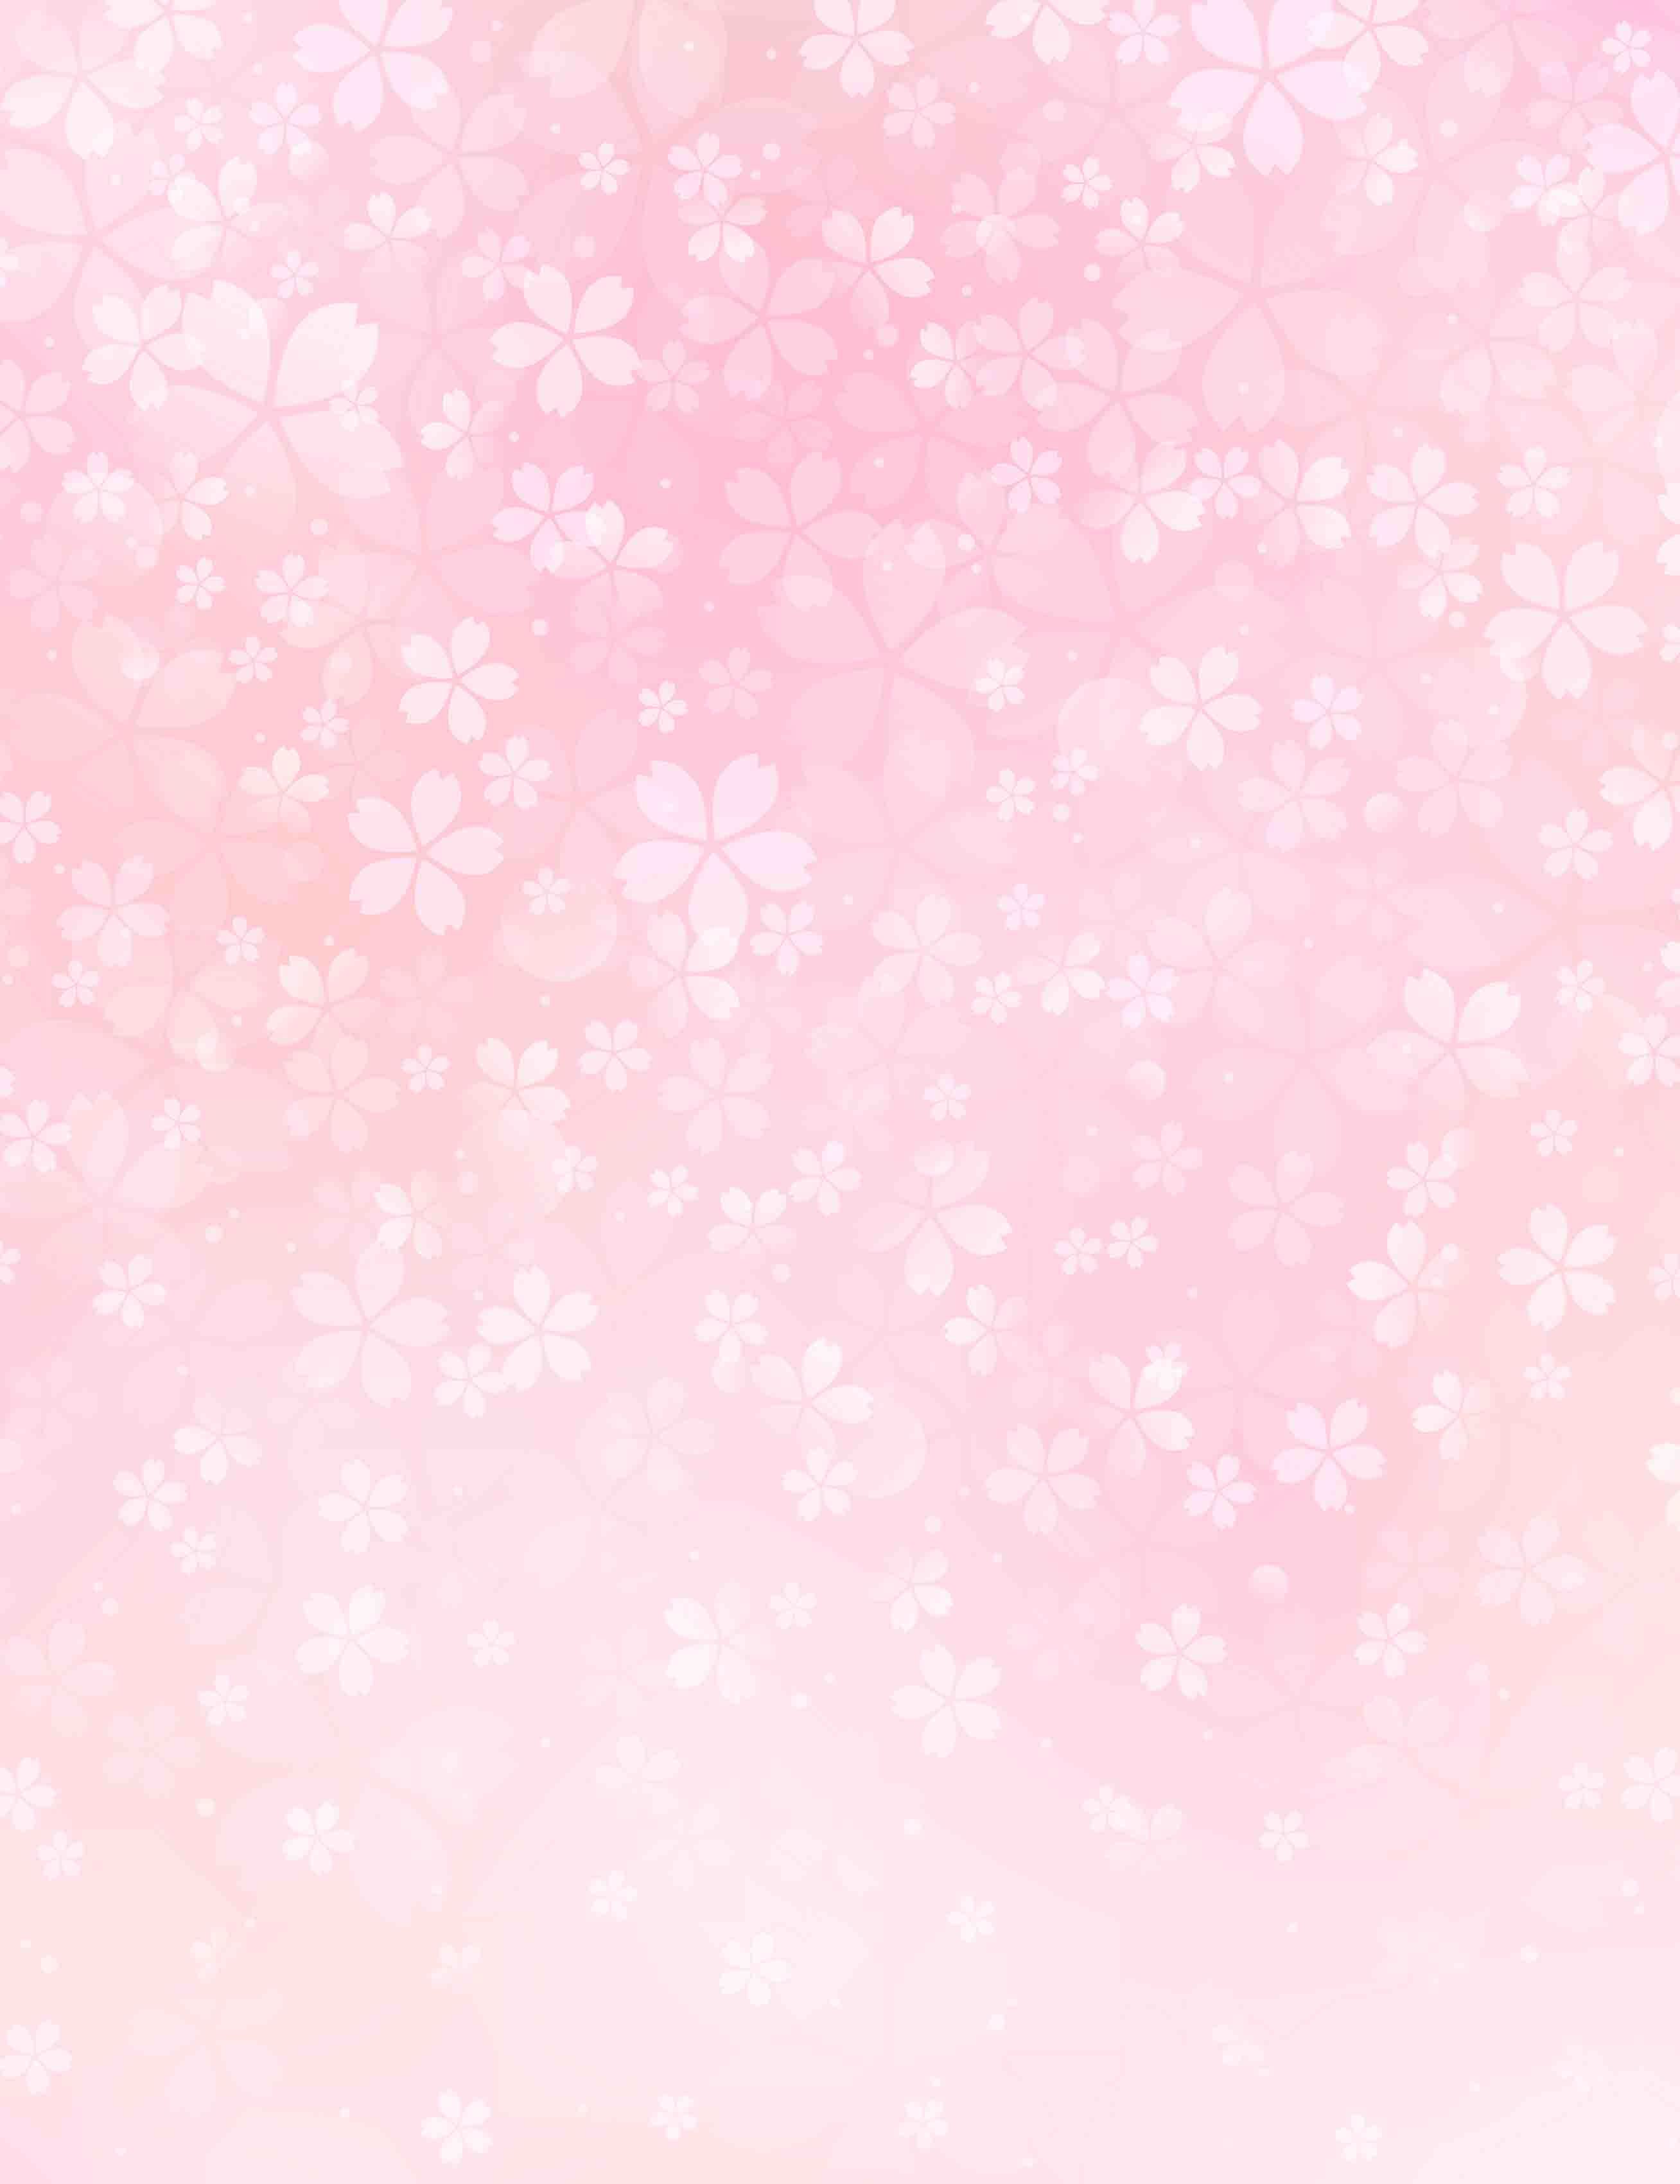 Flowers Printed On Pink Paper Wall Backdrop For Baby Photo Shopbackdrop